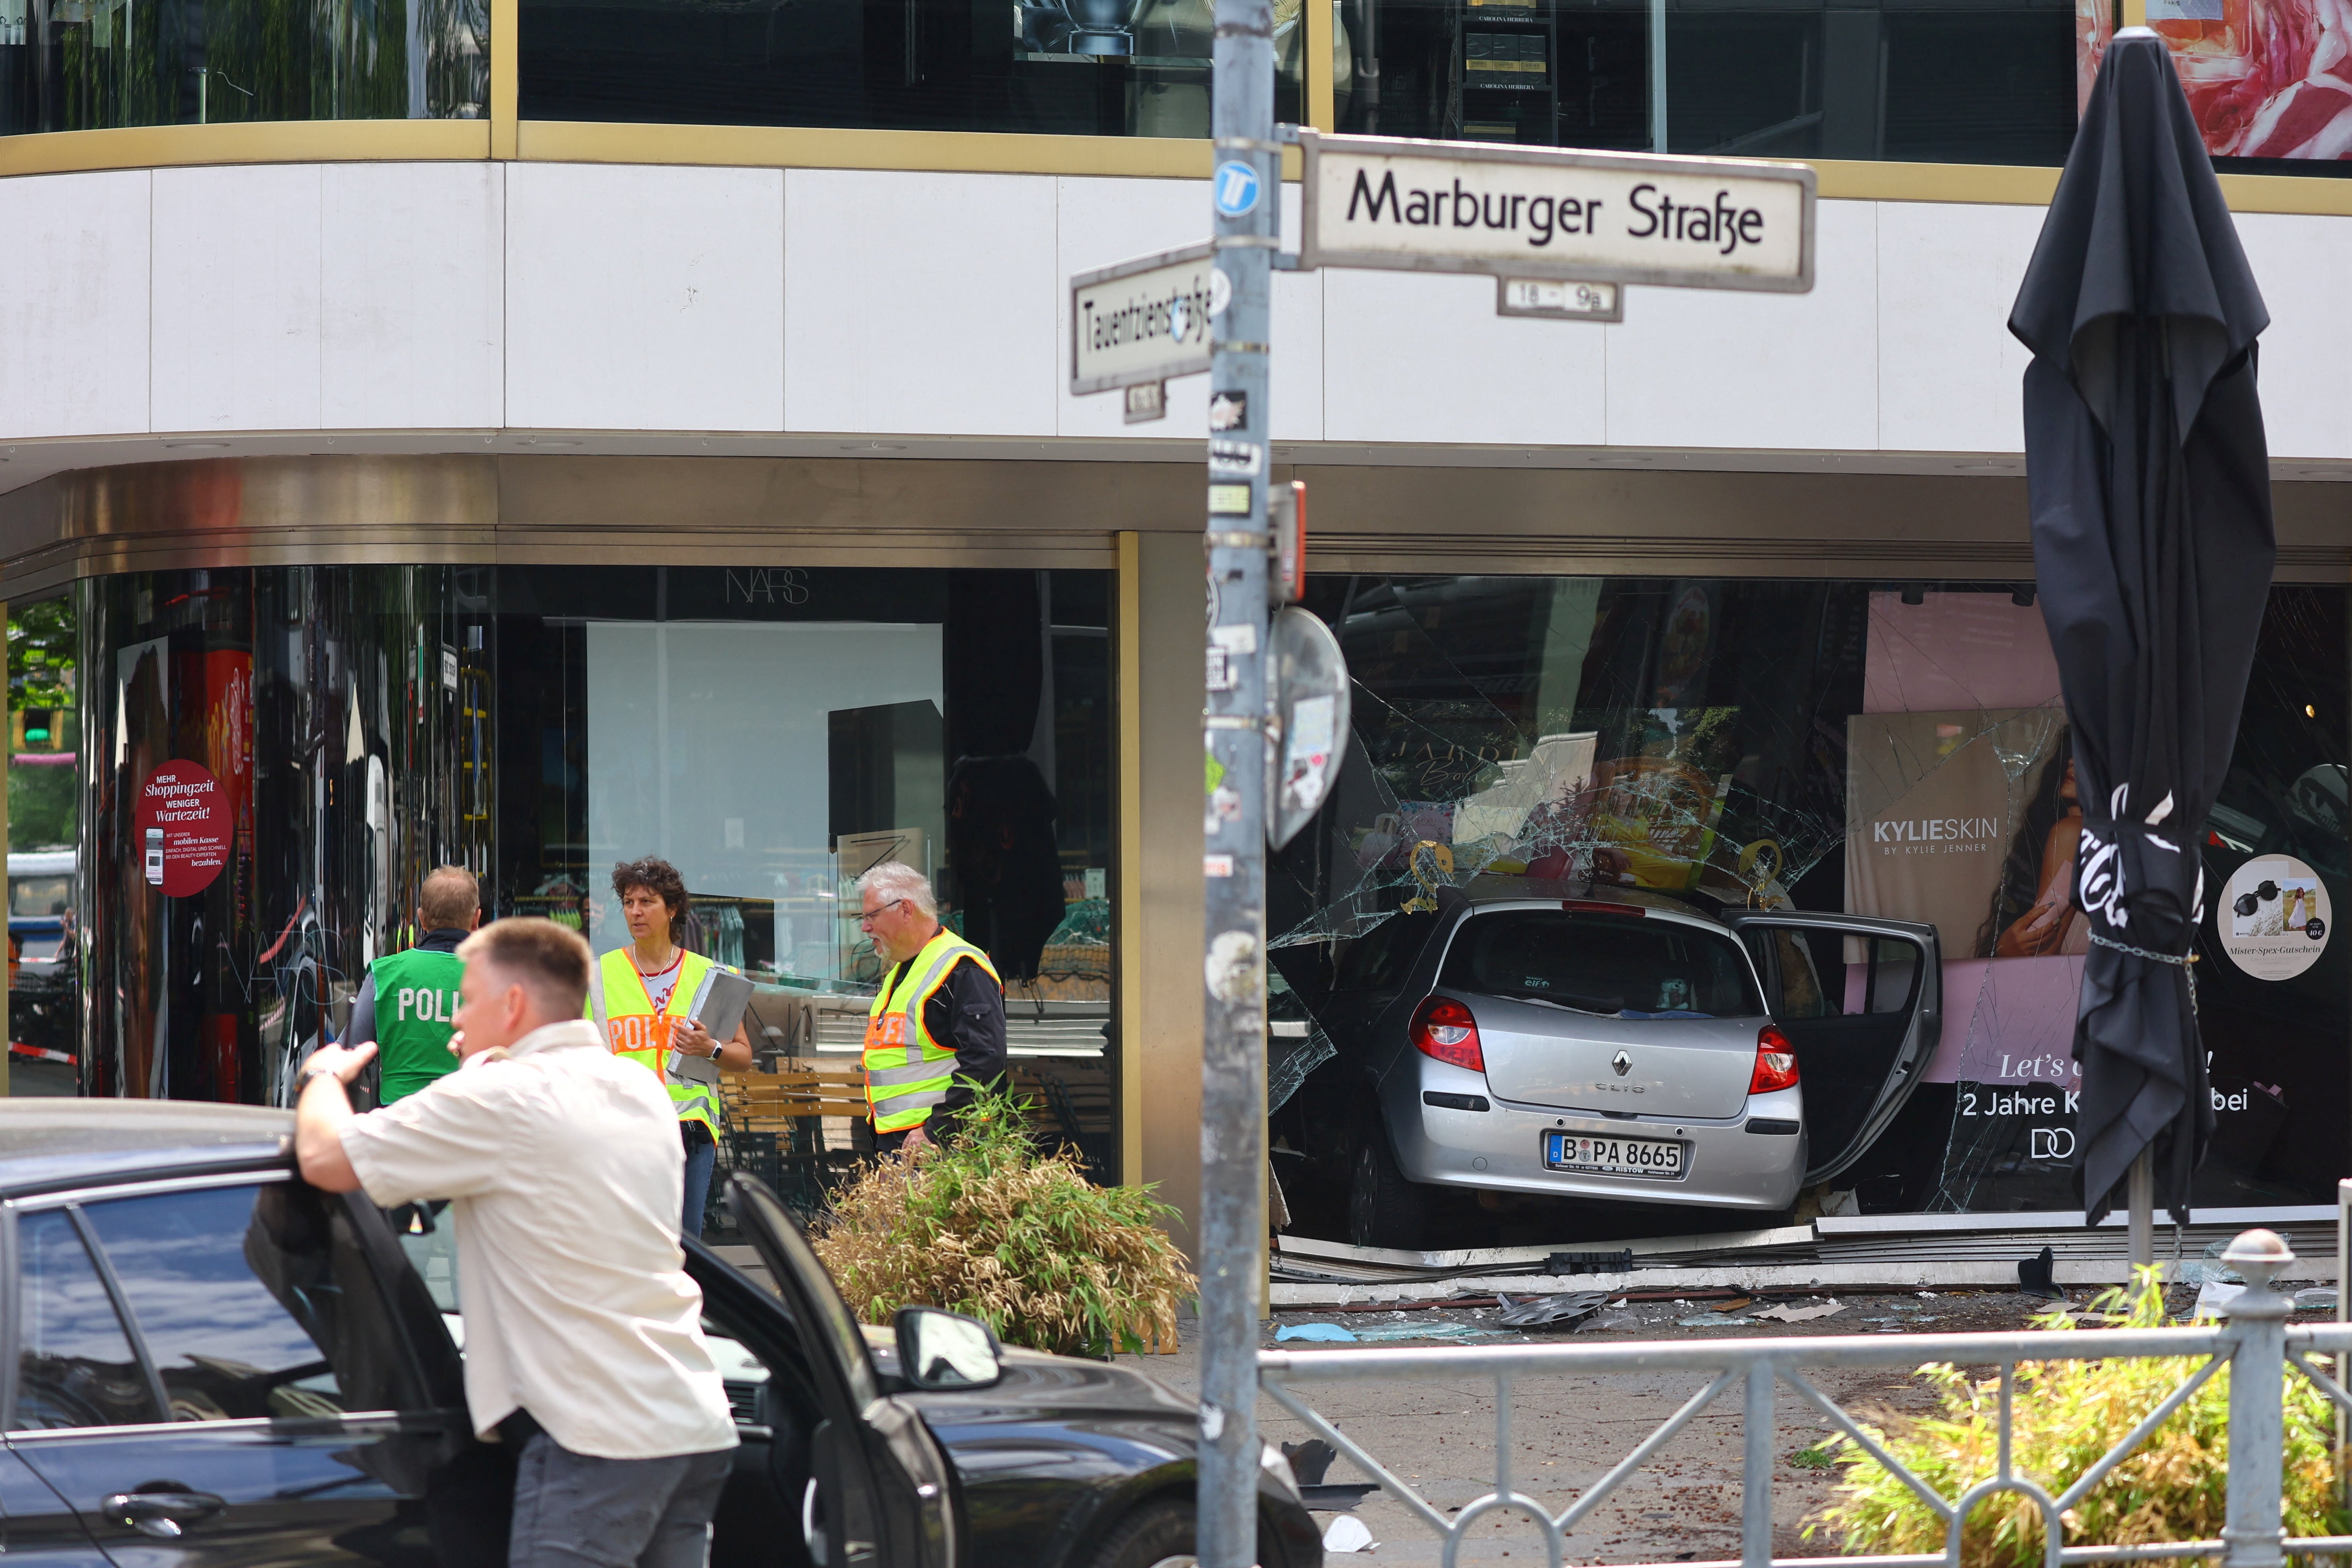 View of the car that crashed into a group of people before hitting a storefront at Tauentzienstrasse in Berlin